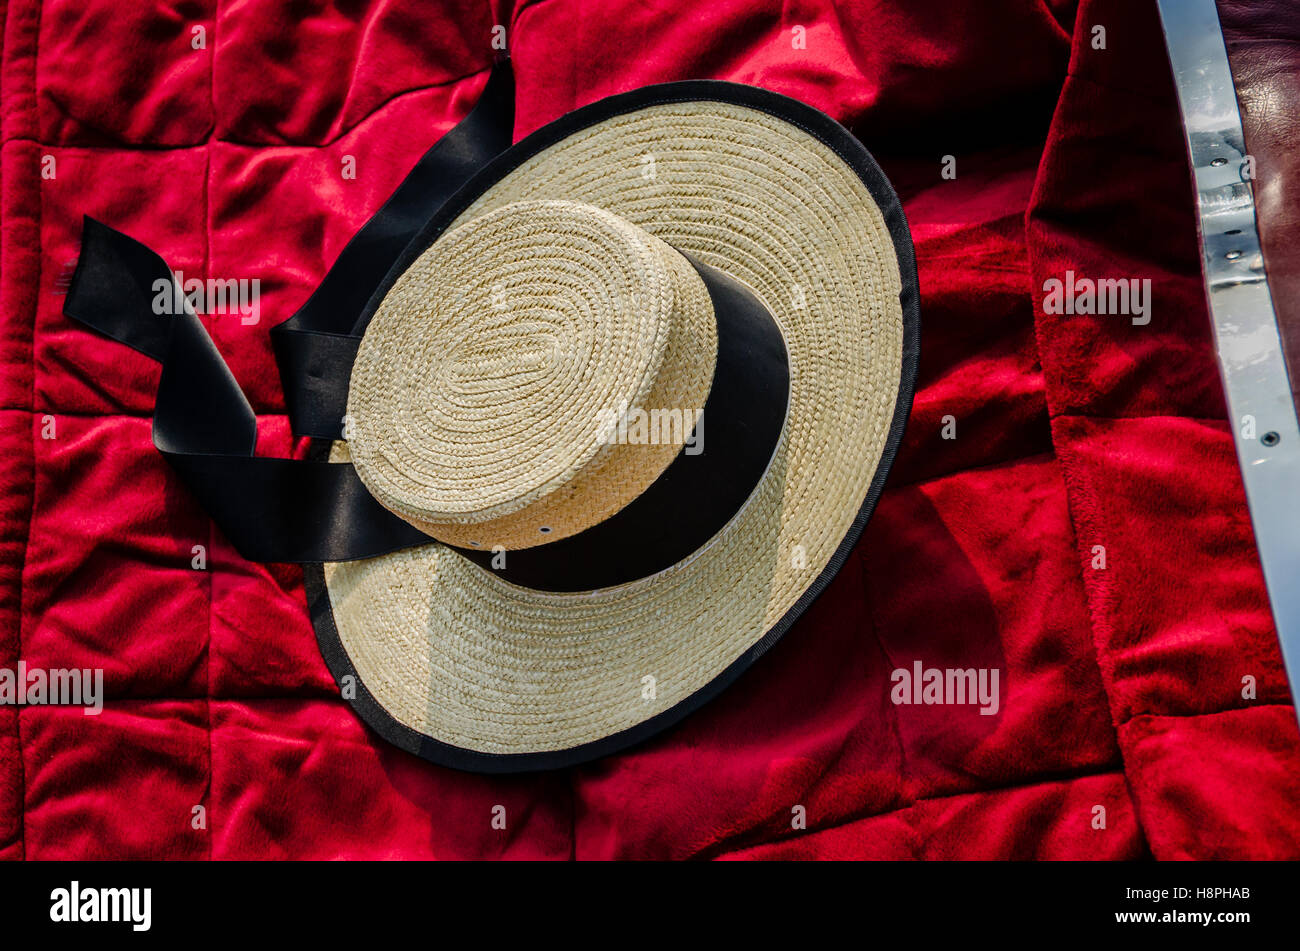 A Gondolier's straw hat resting on a red cover of a Gondola in Venice Stock Photo